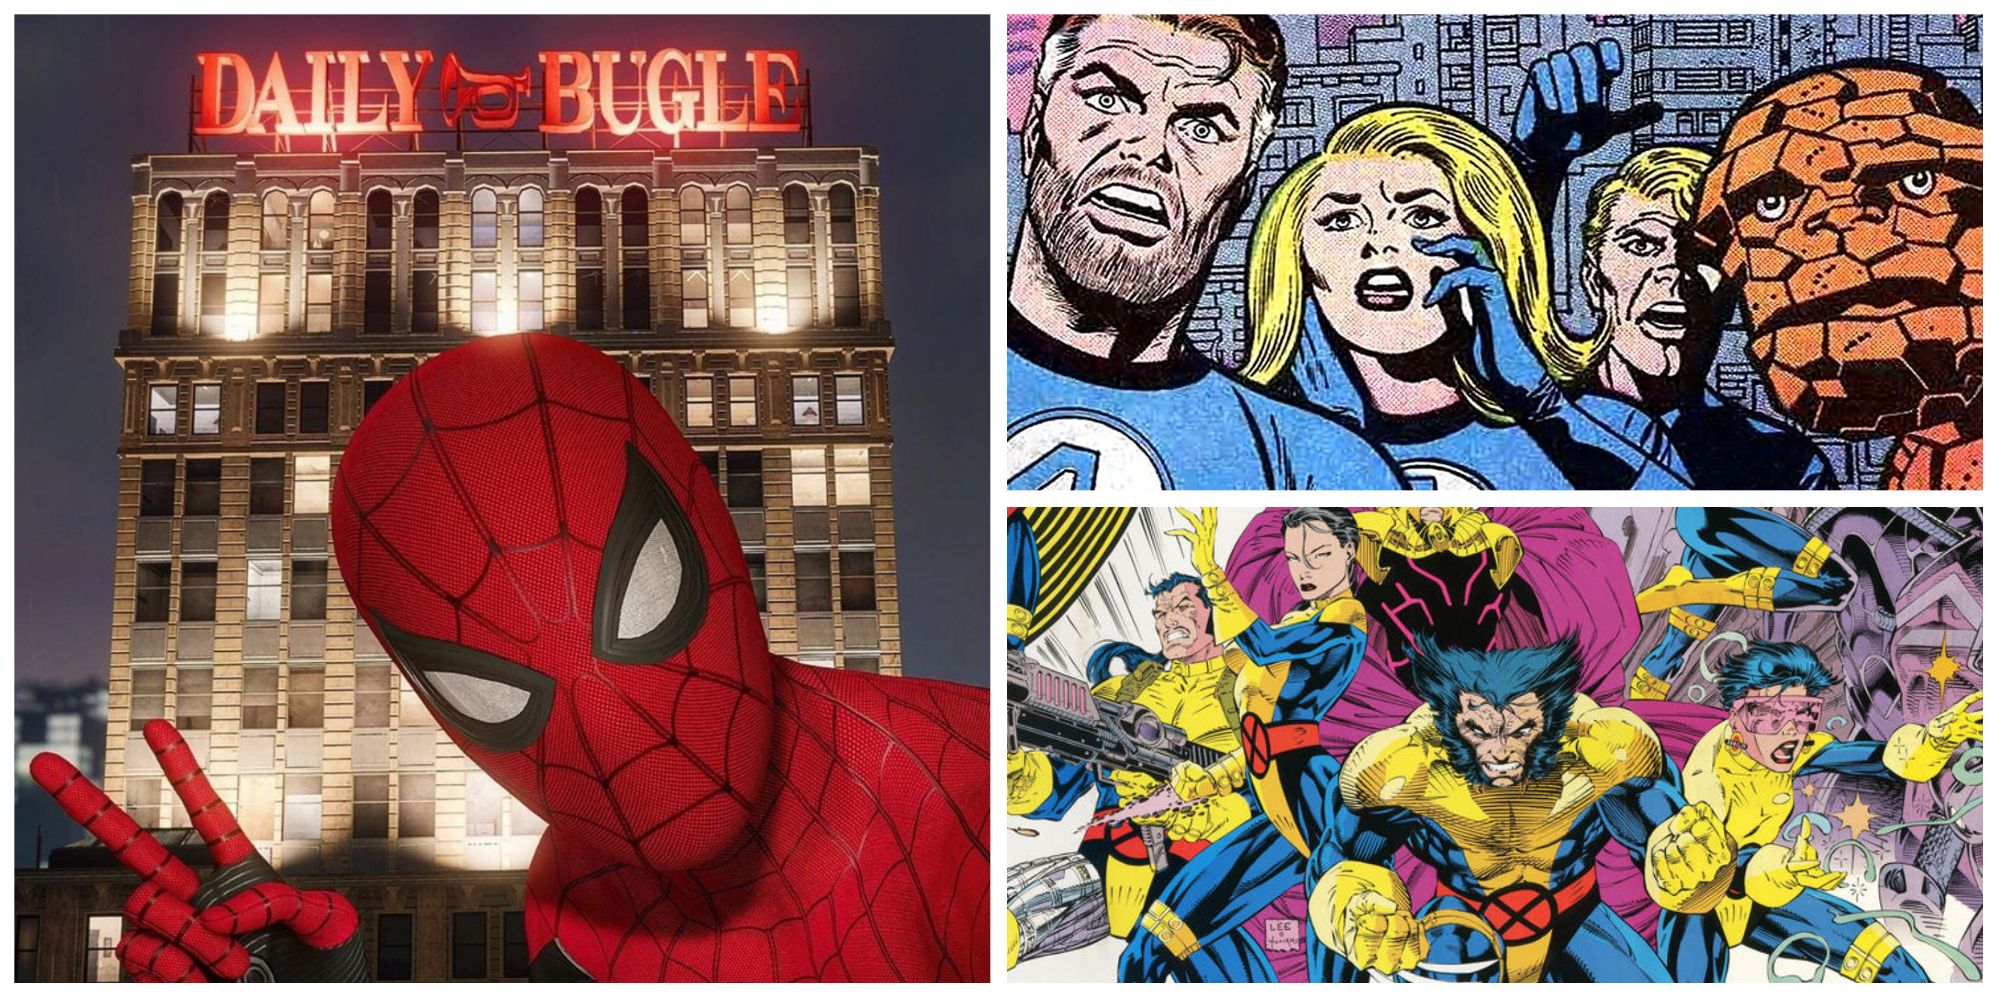 spider-man daily bugle selfie, the fantastic four, and the classic x-men